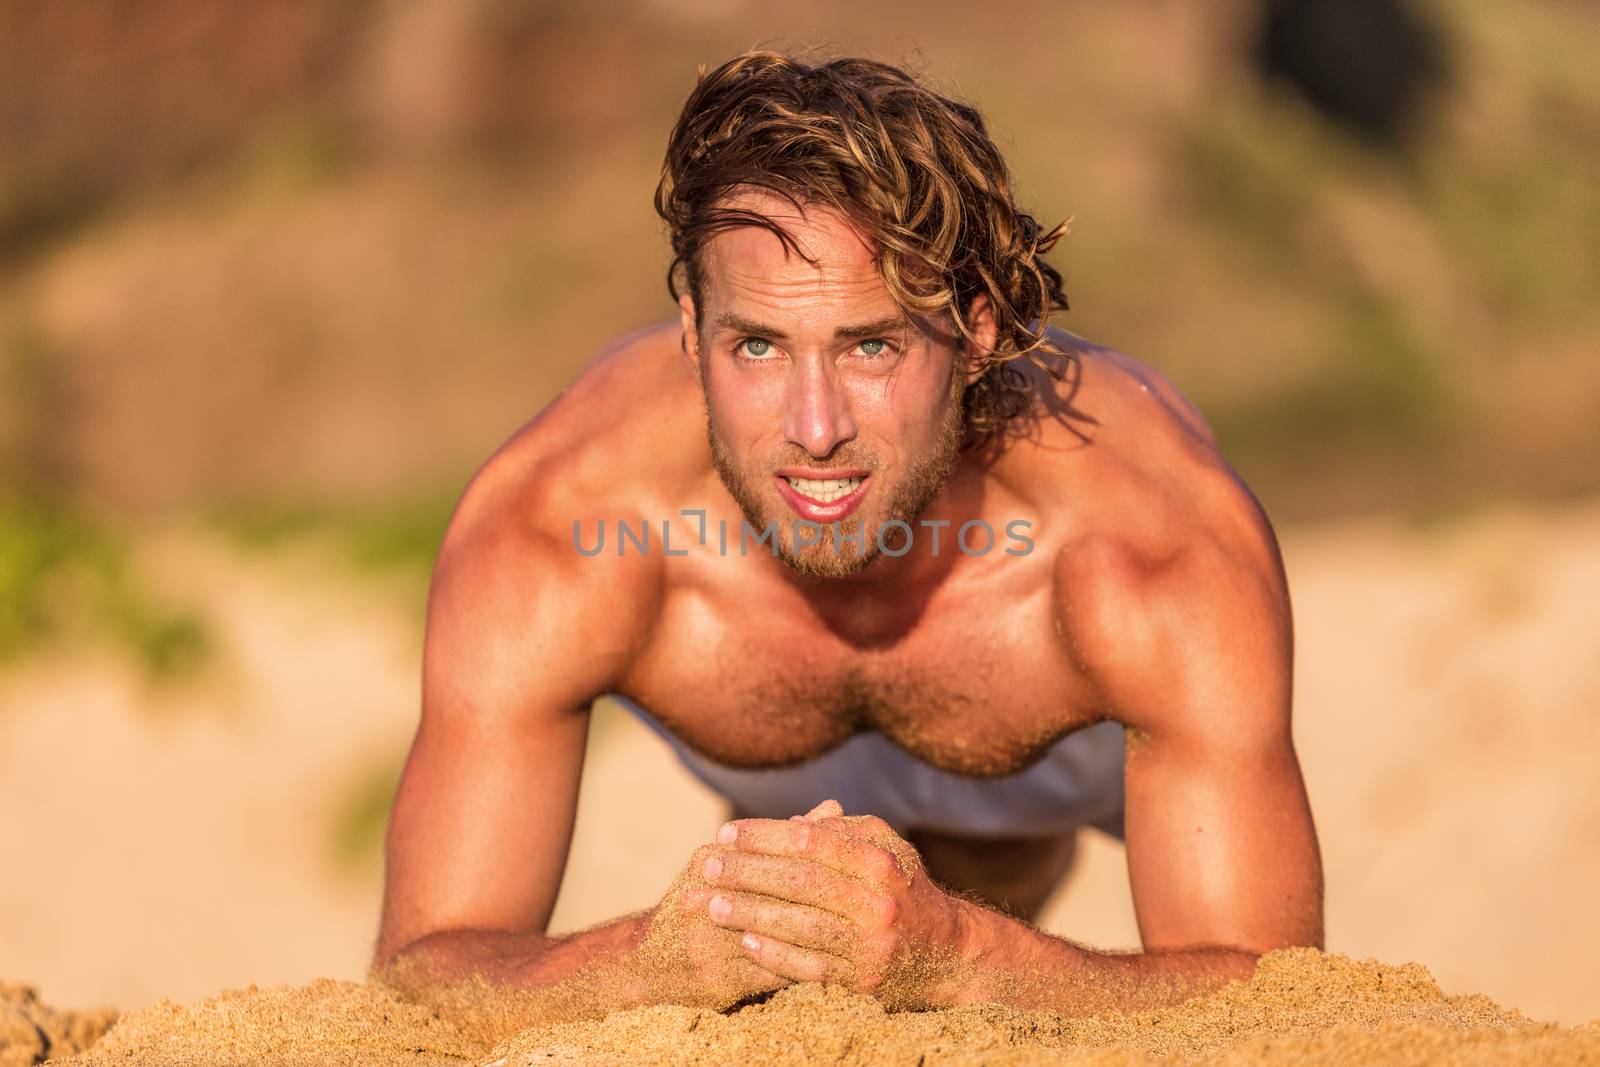 Fitness planking workout man doing plank exercise on beach at sunset. Sexy shirtless male athlete strength training sweating working out core body exercises by Maridav